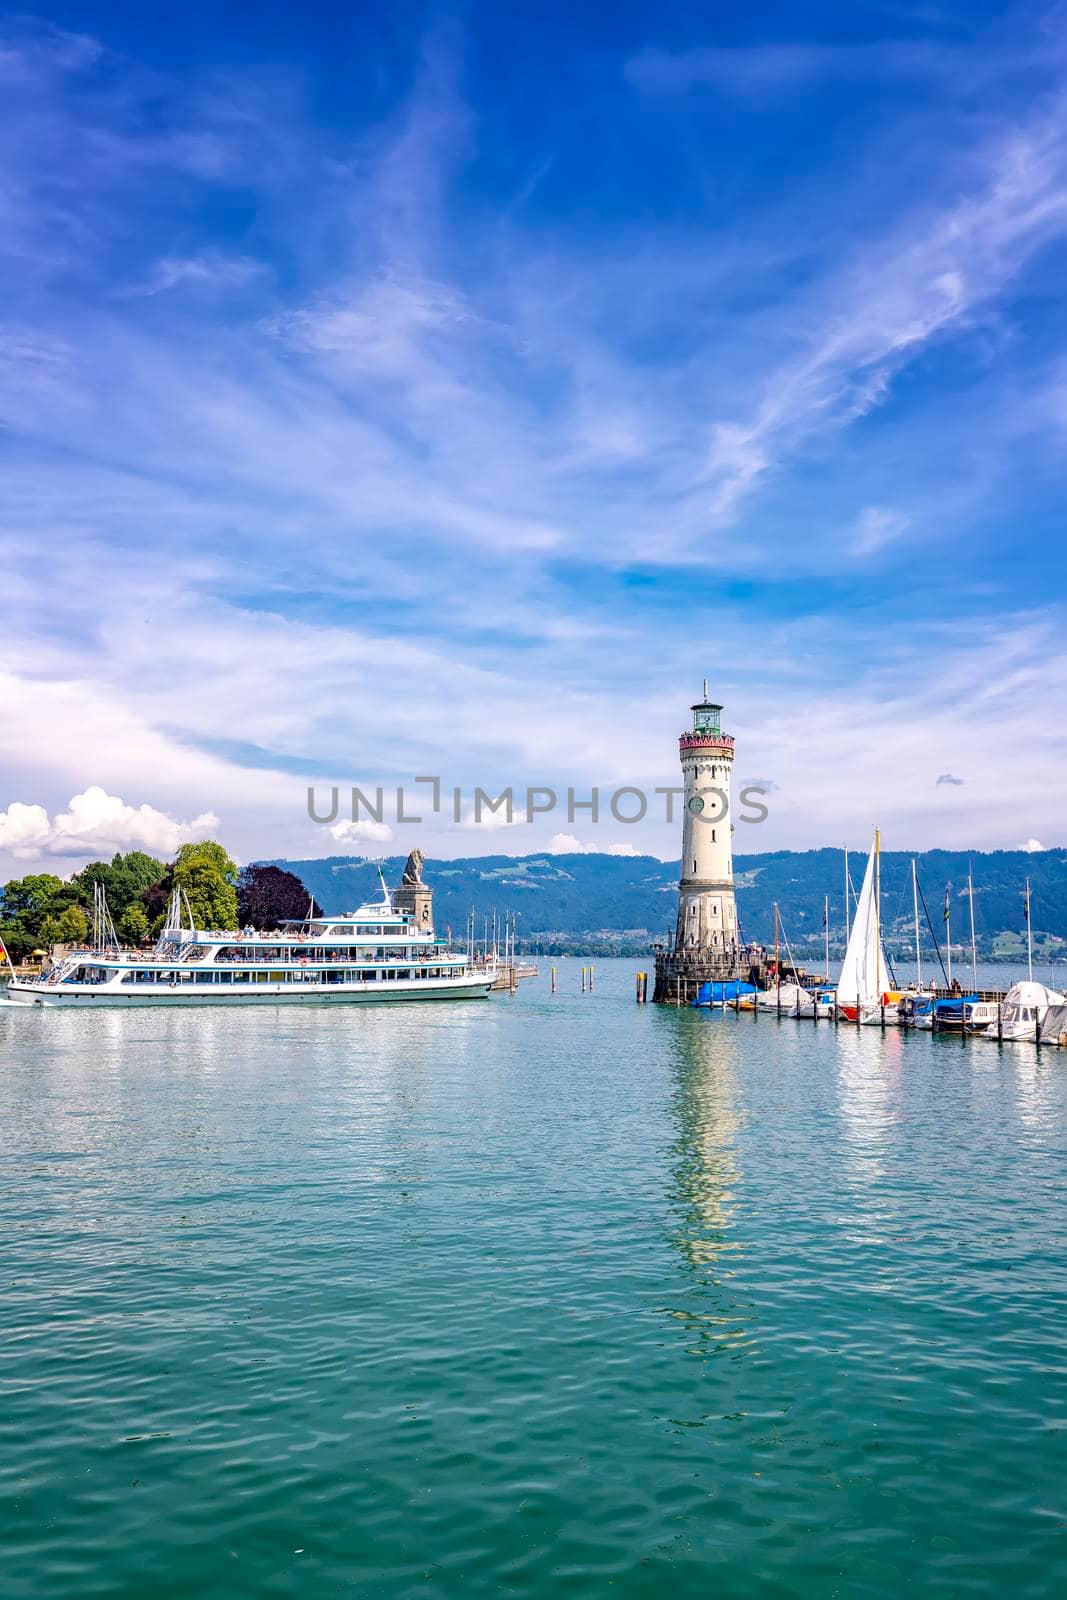 Lindau, Germany - July 21, 2019: Ship sails away from picturesque port town Lindau on Lake Constance.. Vertical view